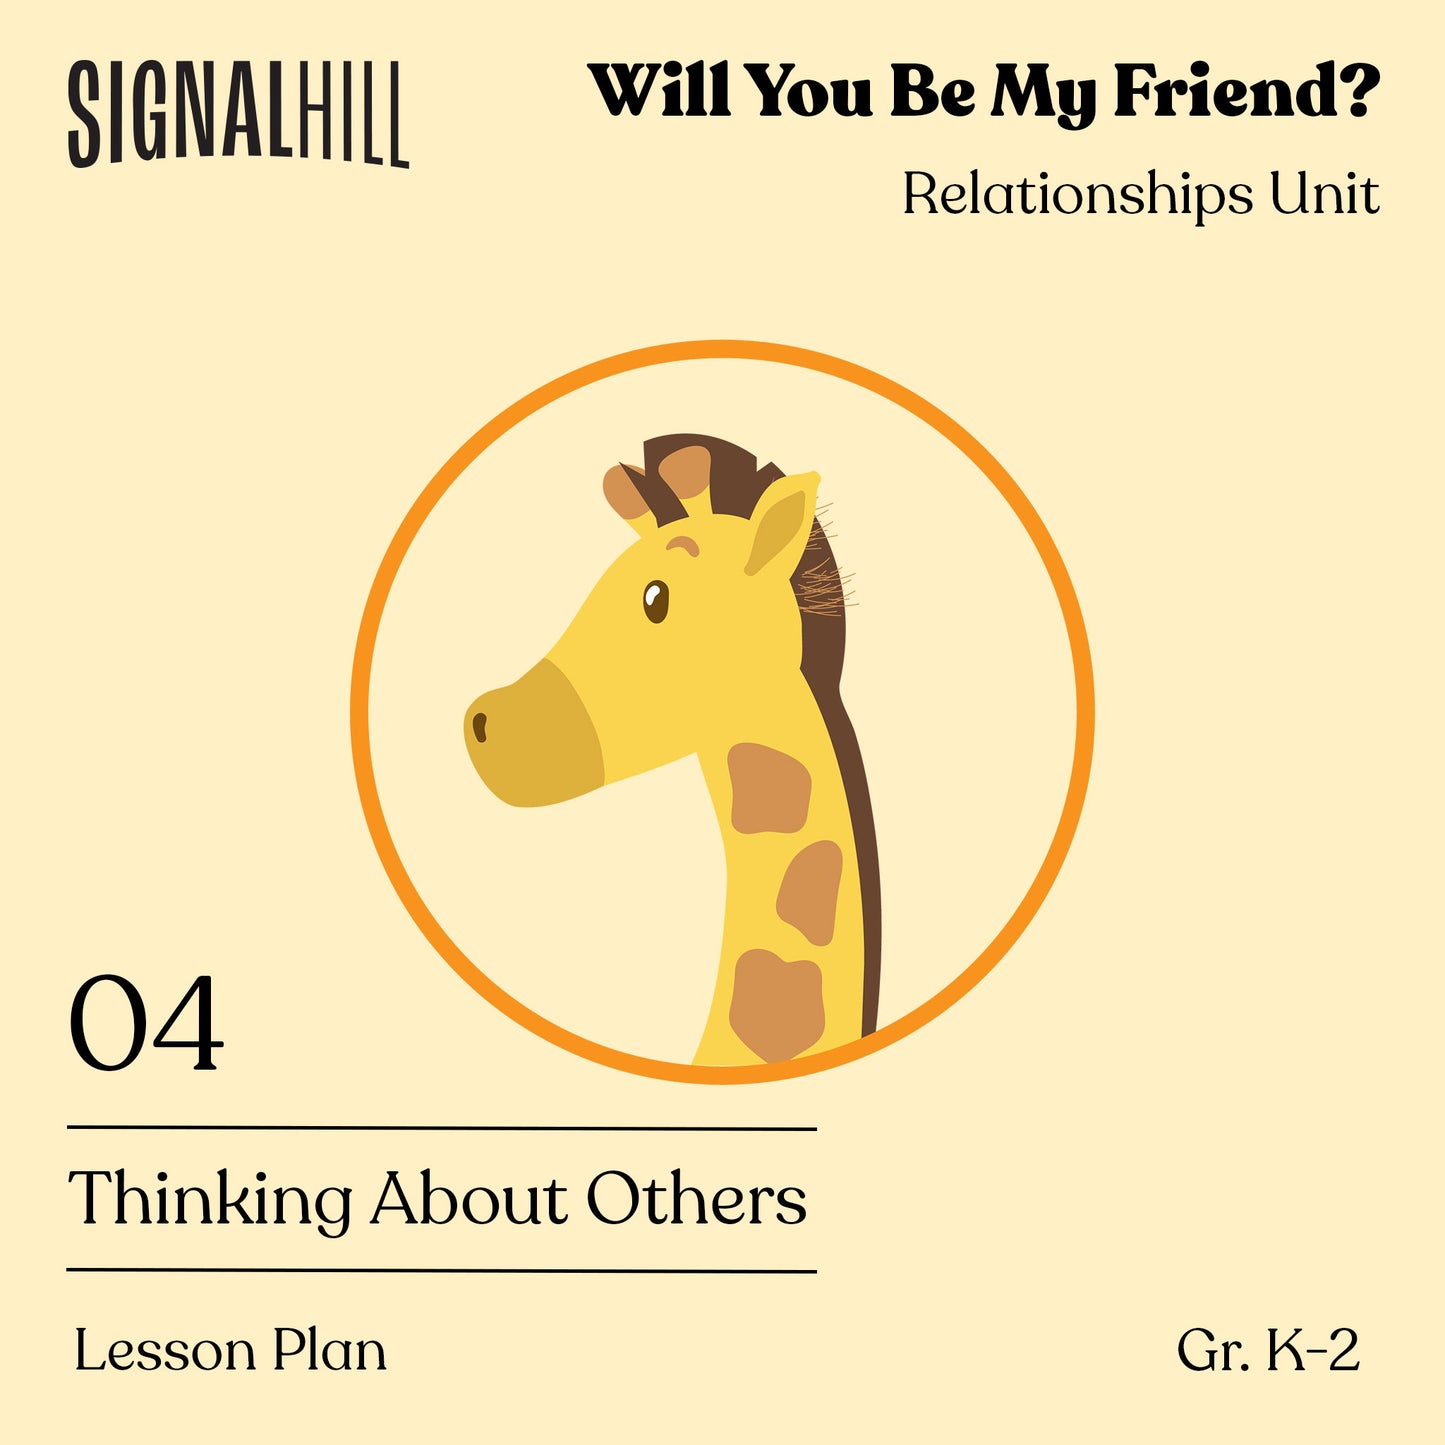 Lesson Plan 4: Thinking About Others